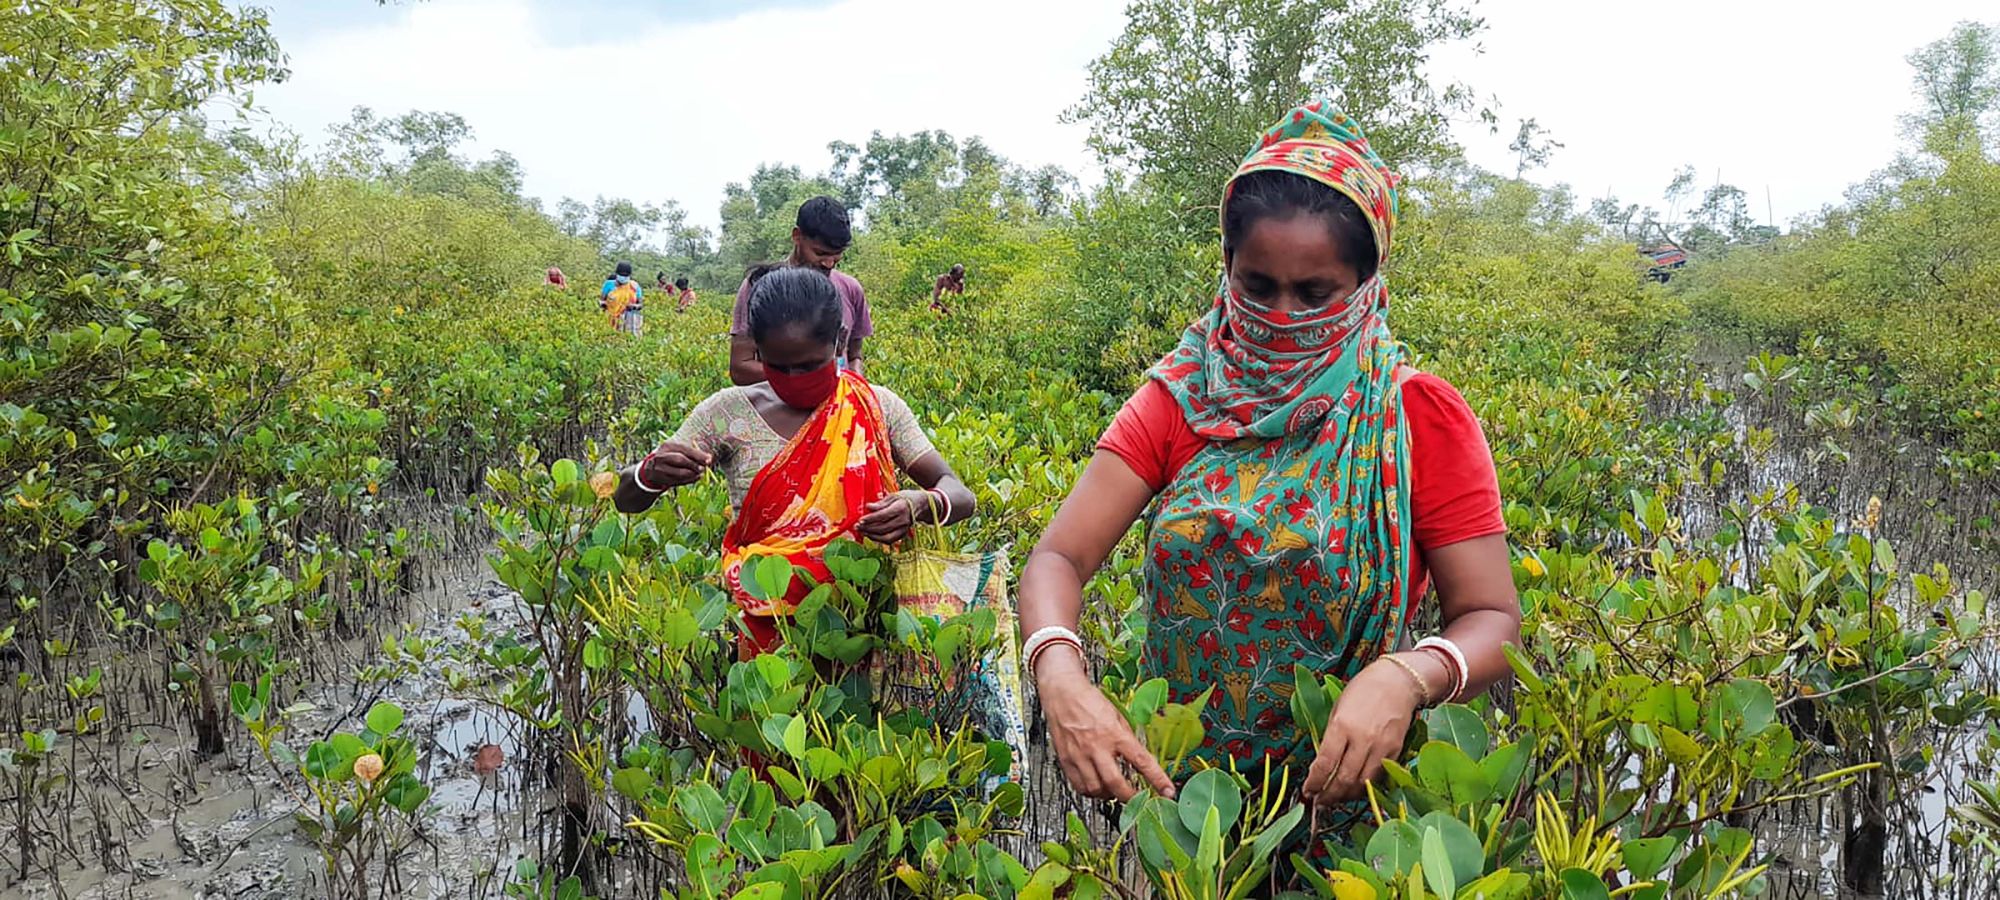 The Green Guardians of Jharkhali: Women of the Sundarbans Combat Climate Change with Mangroves